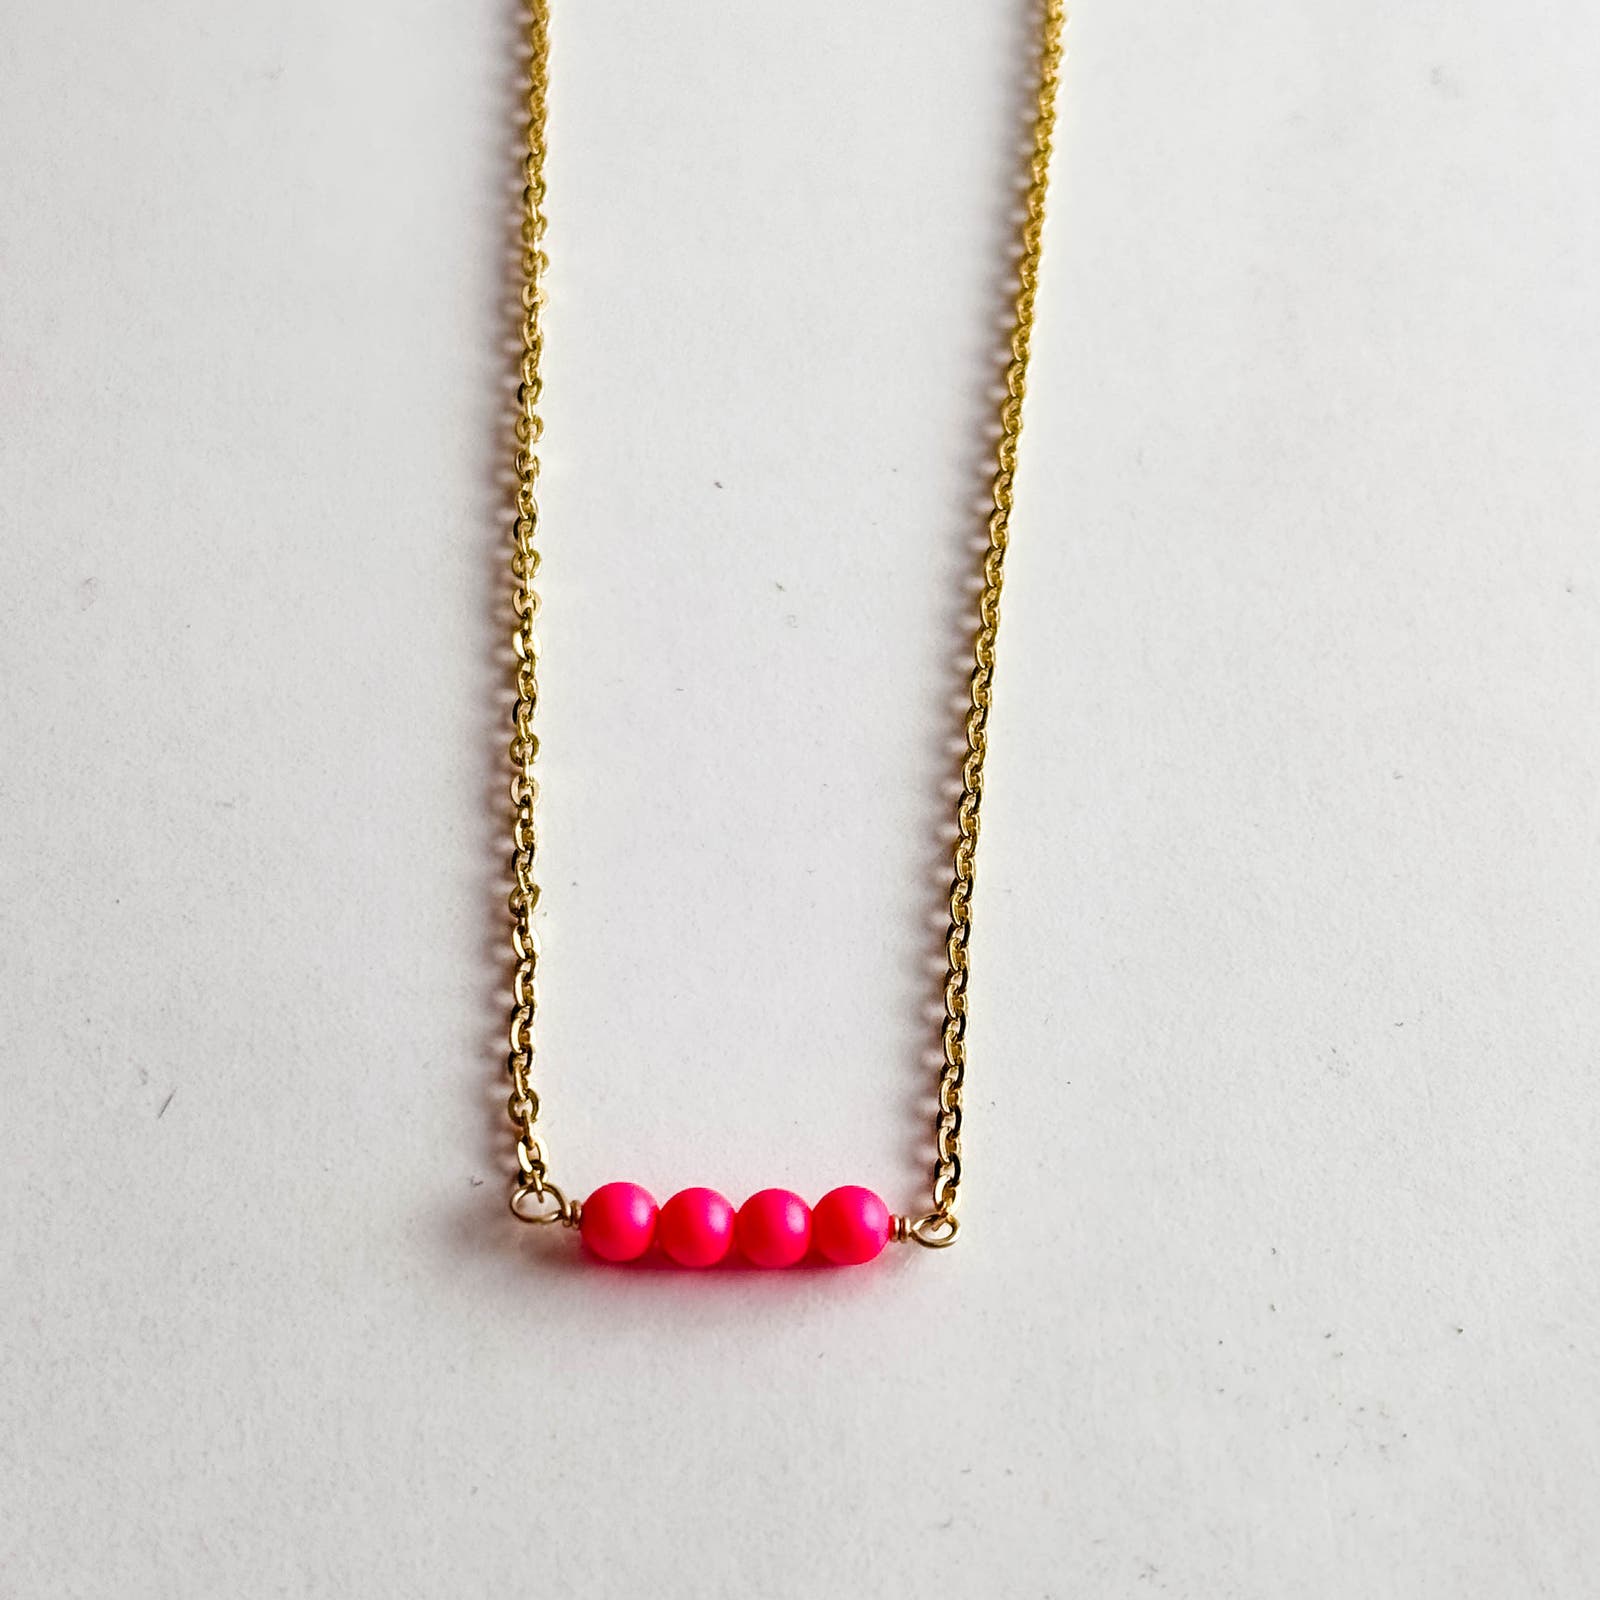 Hot Pink Dainty Bead Necklace